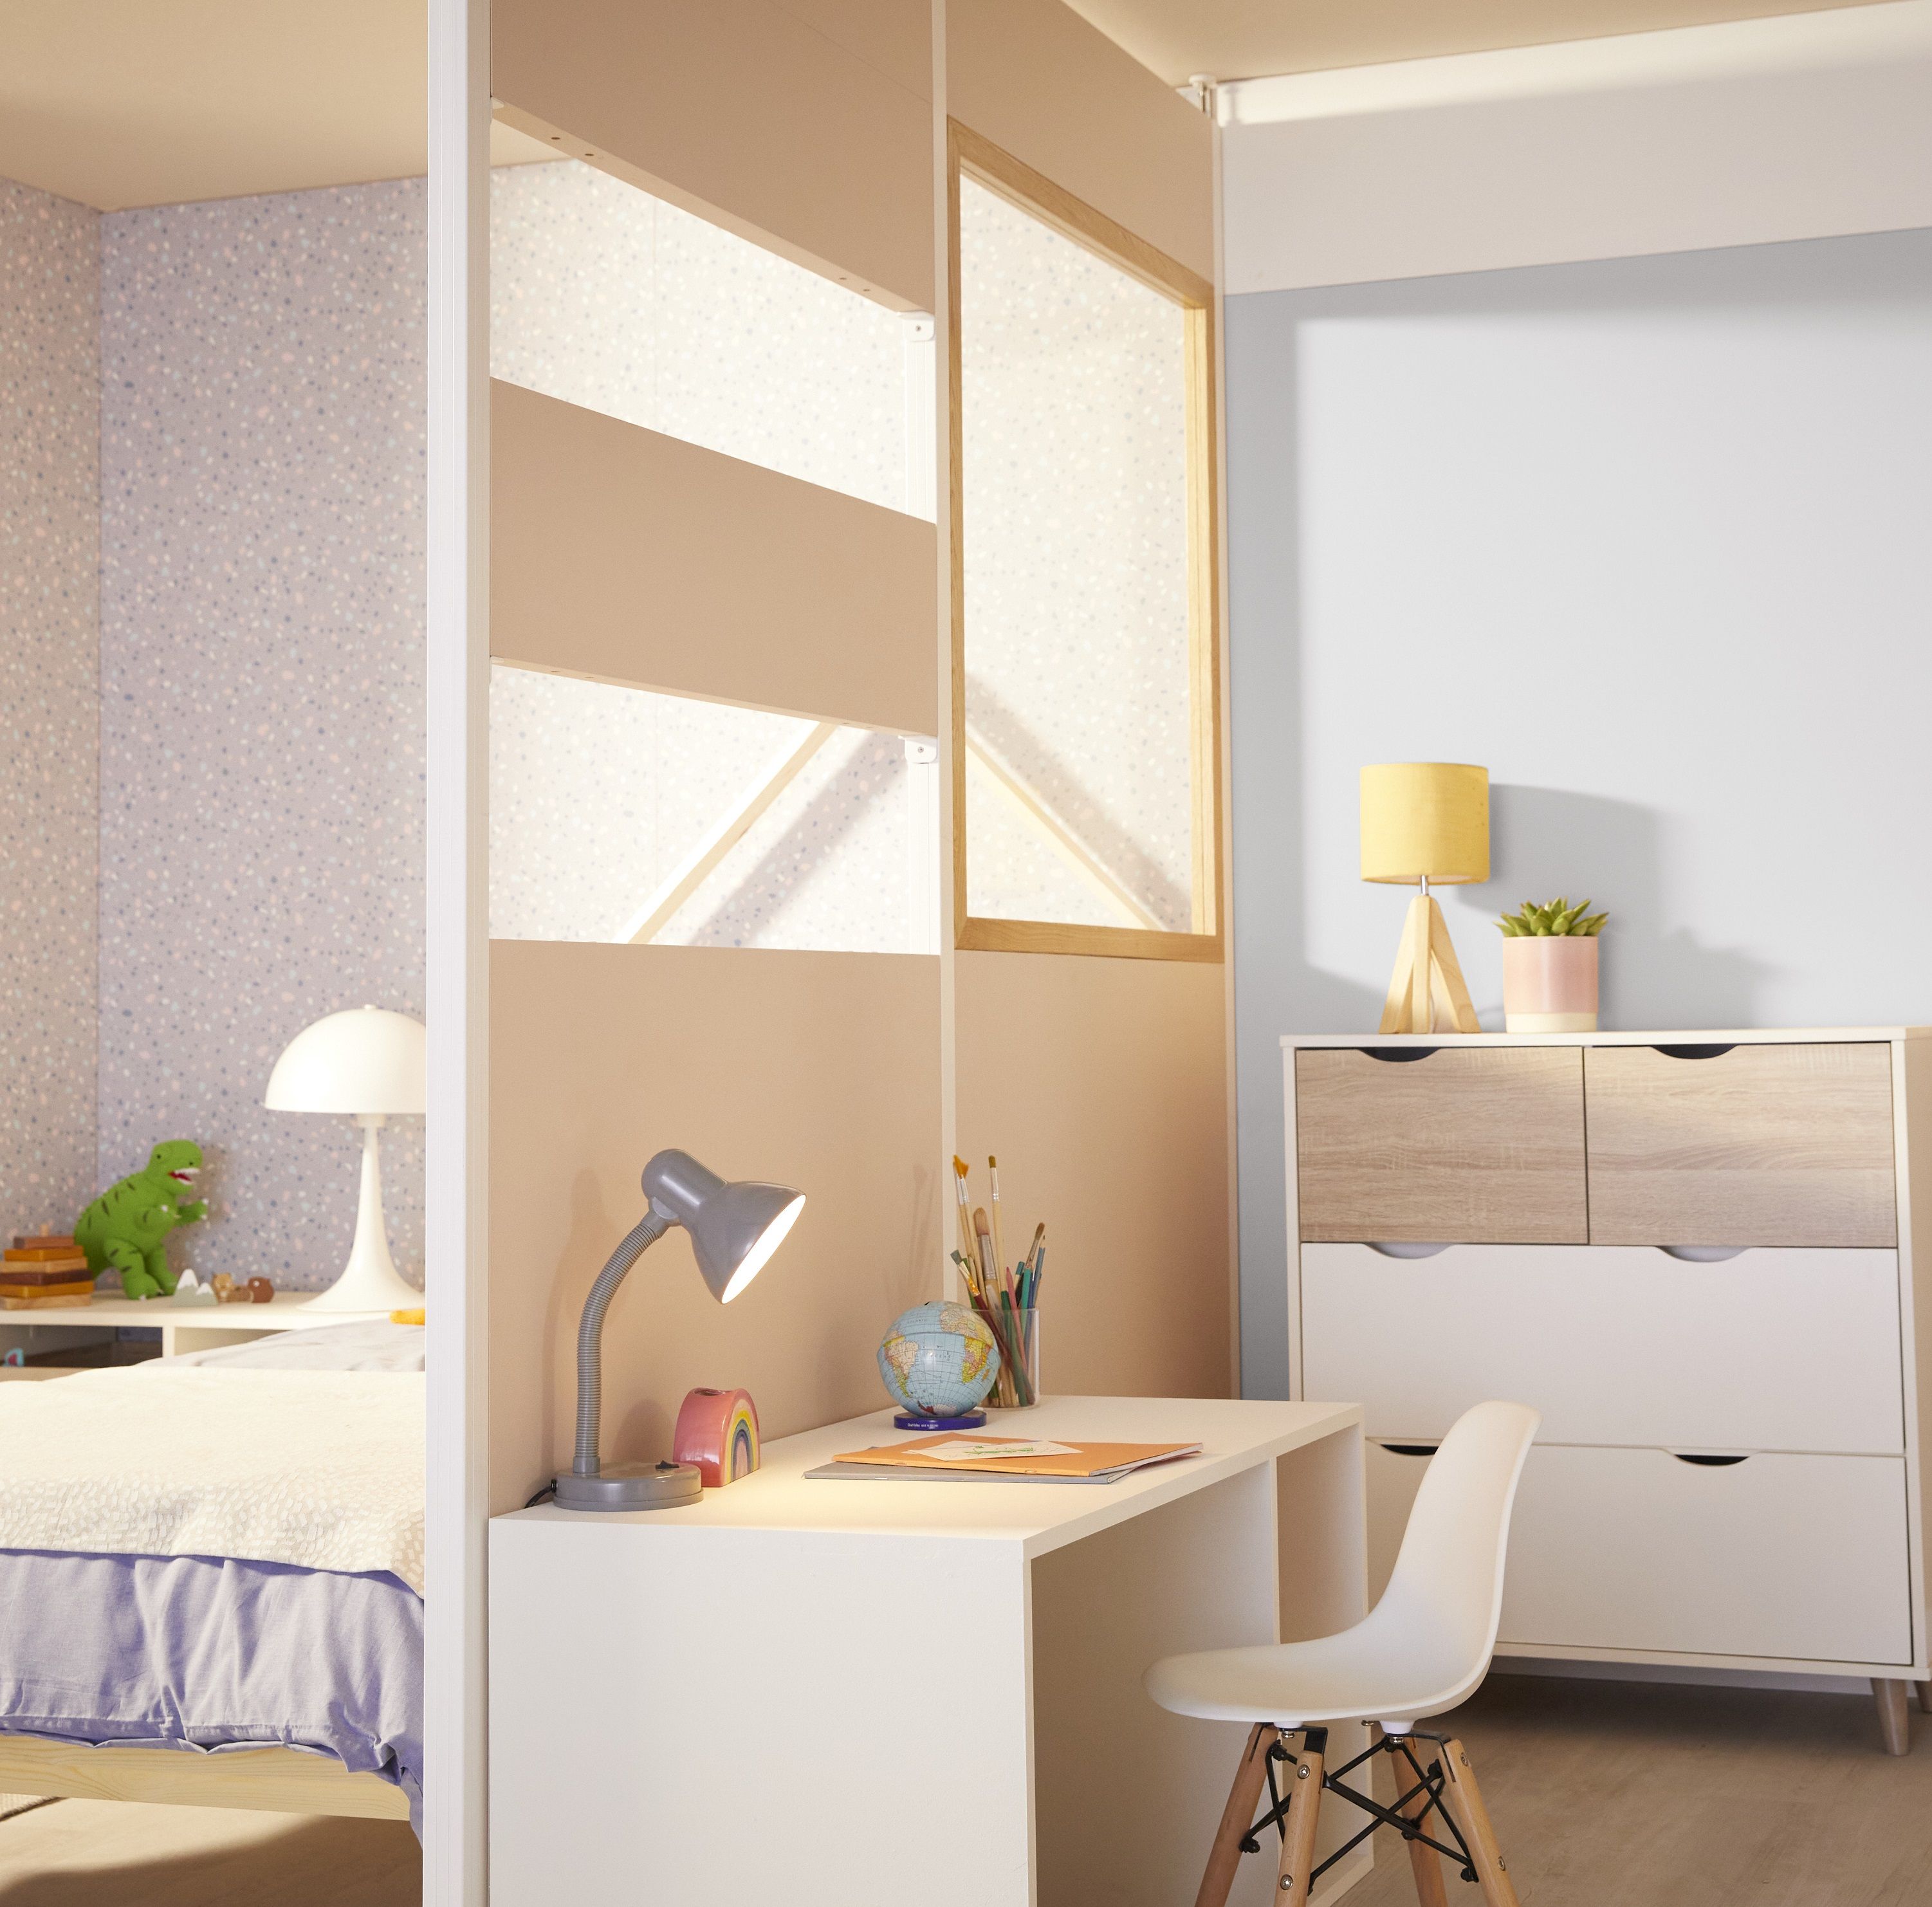 BQ Launches Affordable Modular Room Dividers